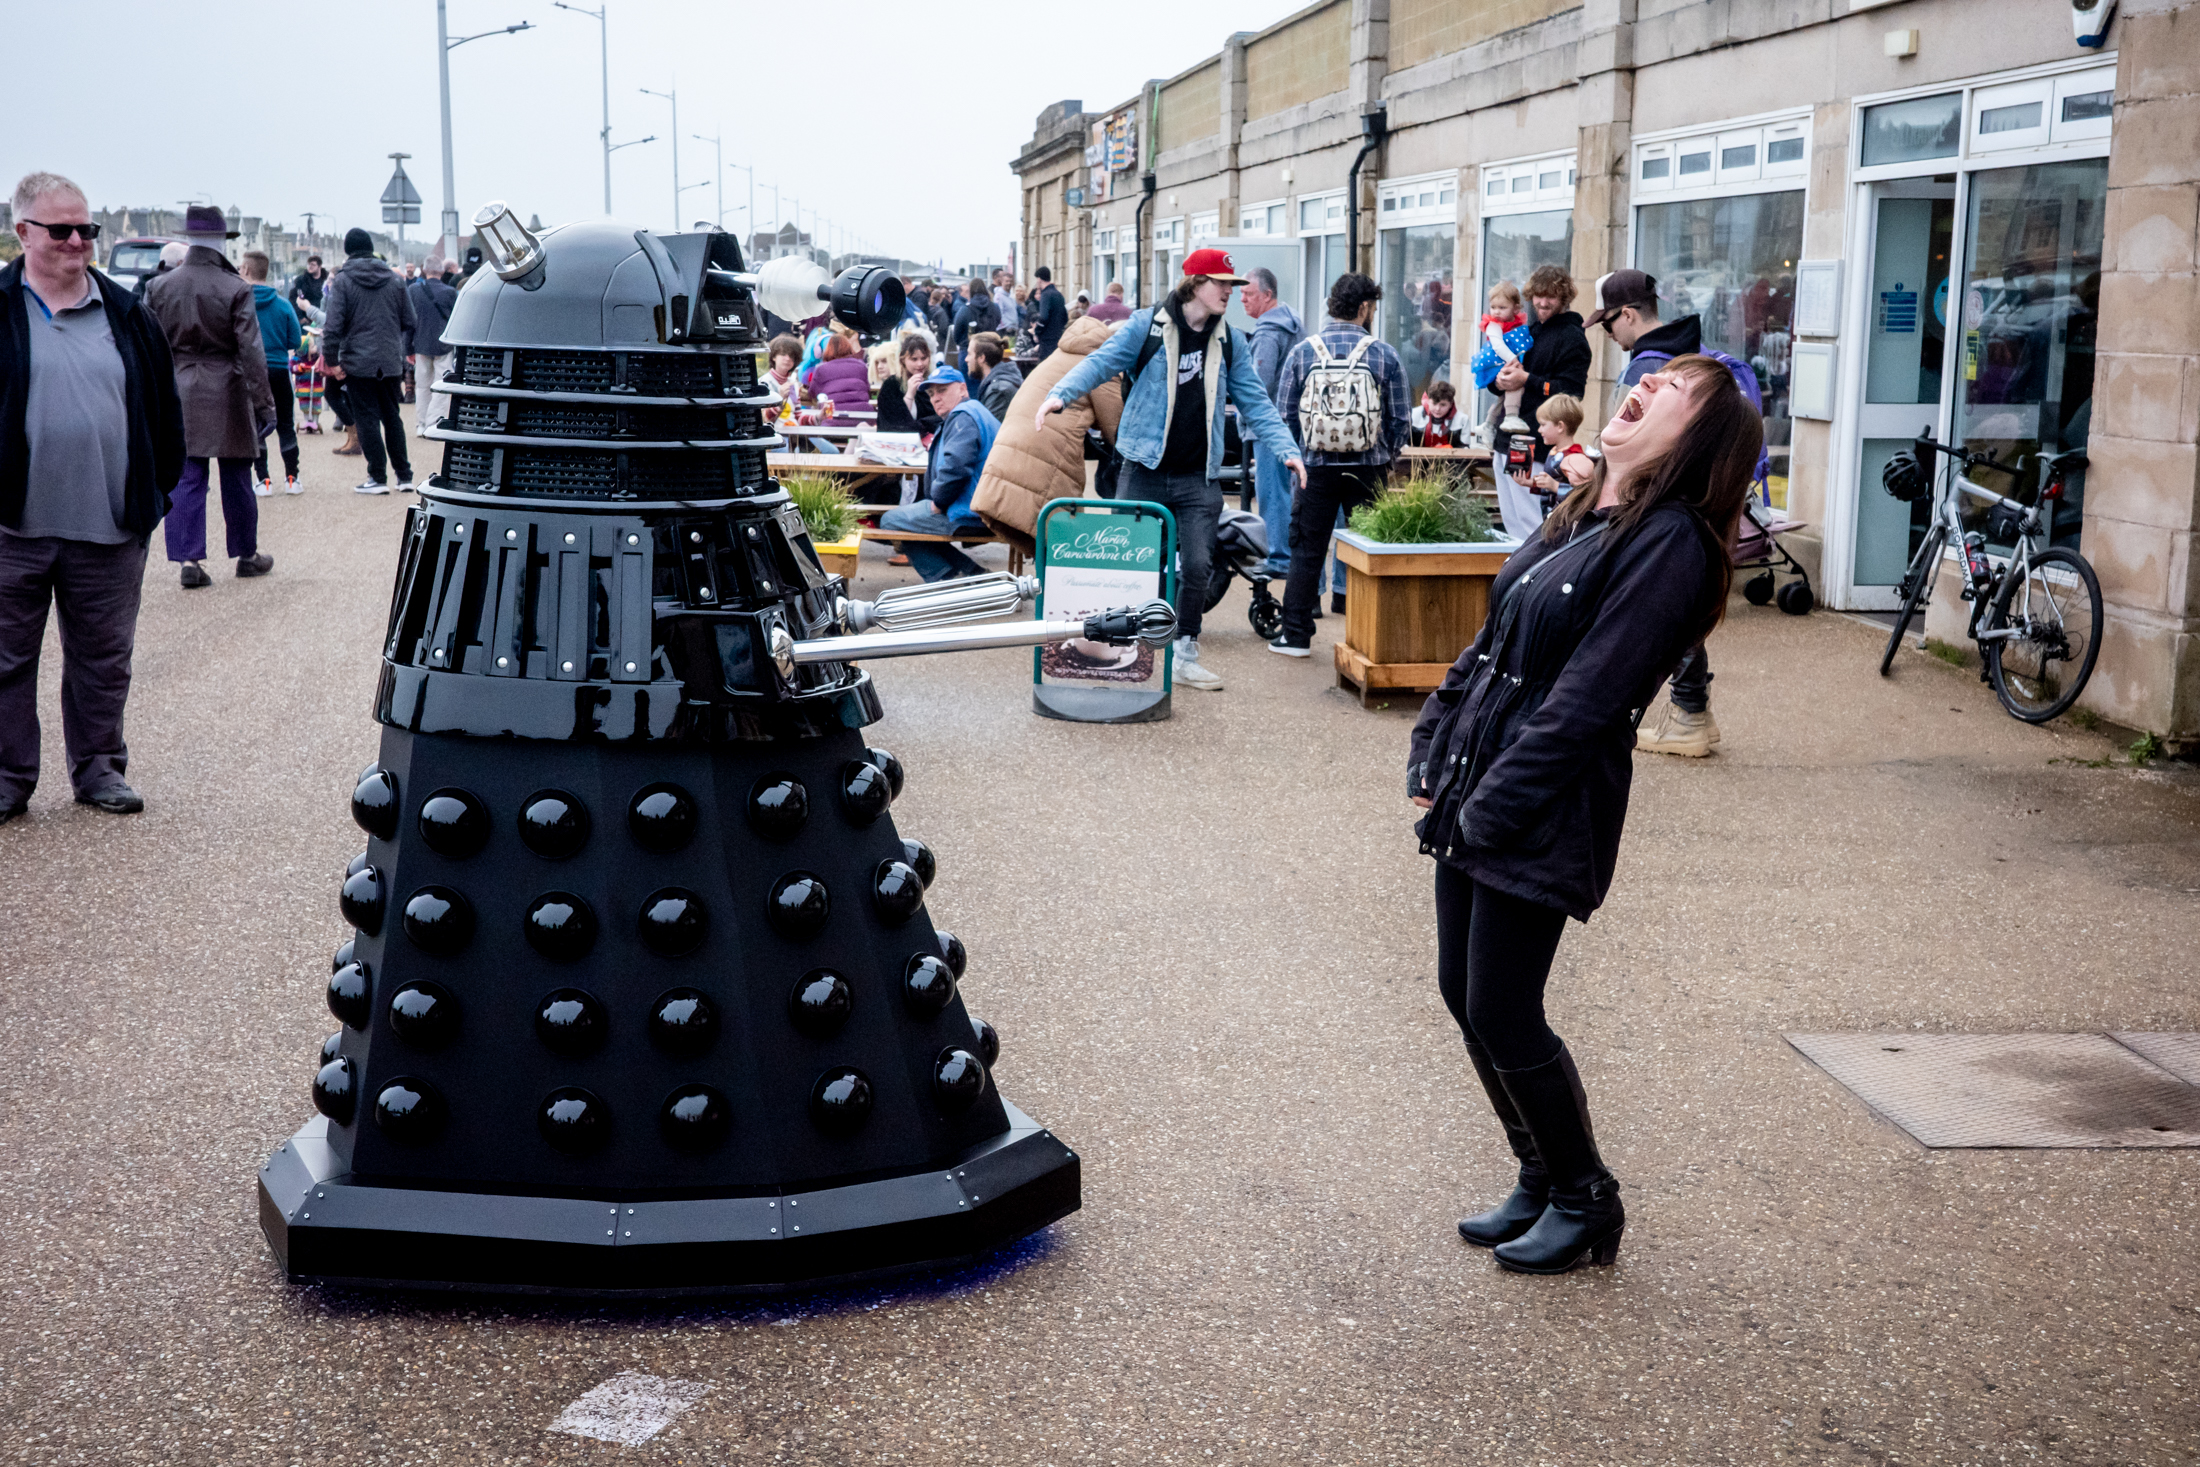 Street photography of a Dalek at the Stars of Time Comic Con, at the Tropicana in Weston-super-Mare, North Somerset.